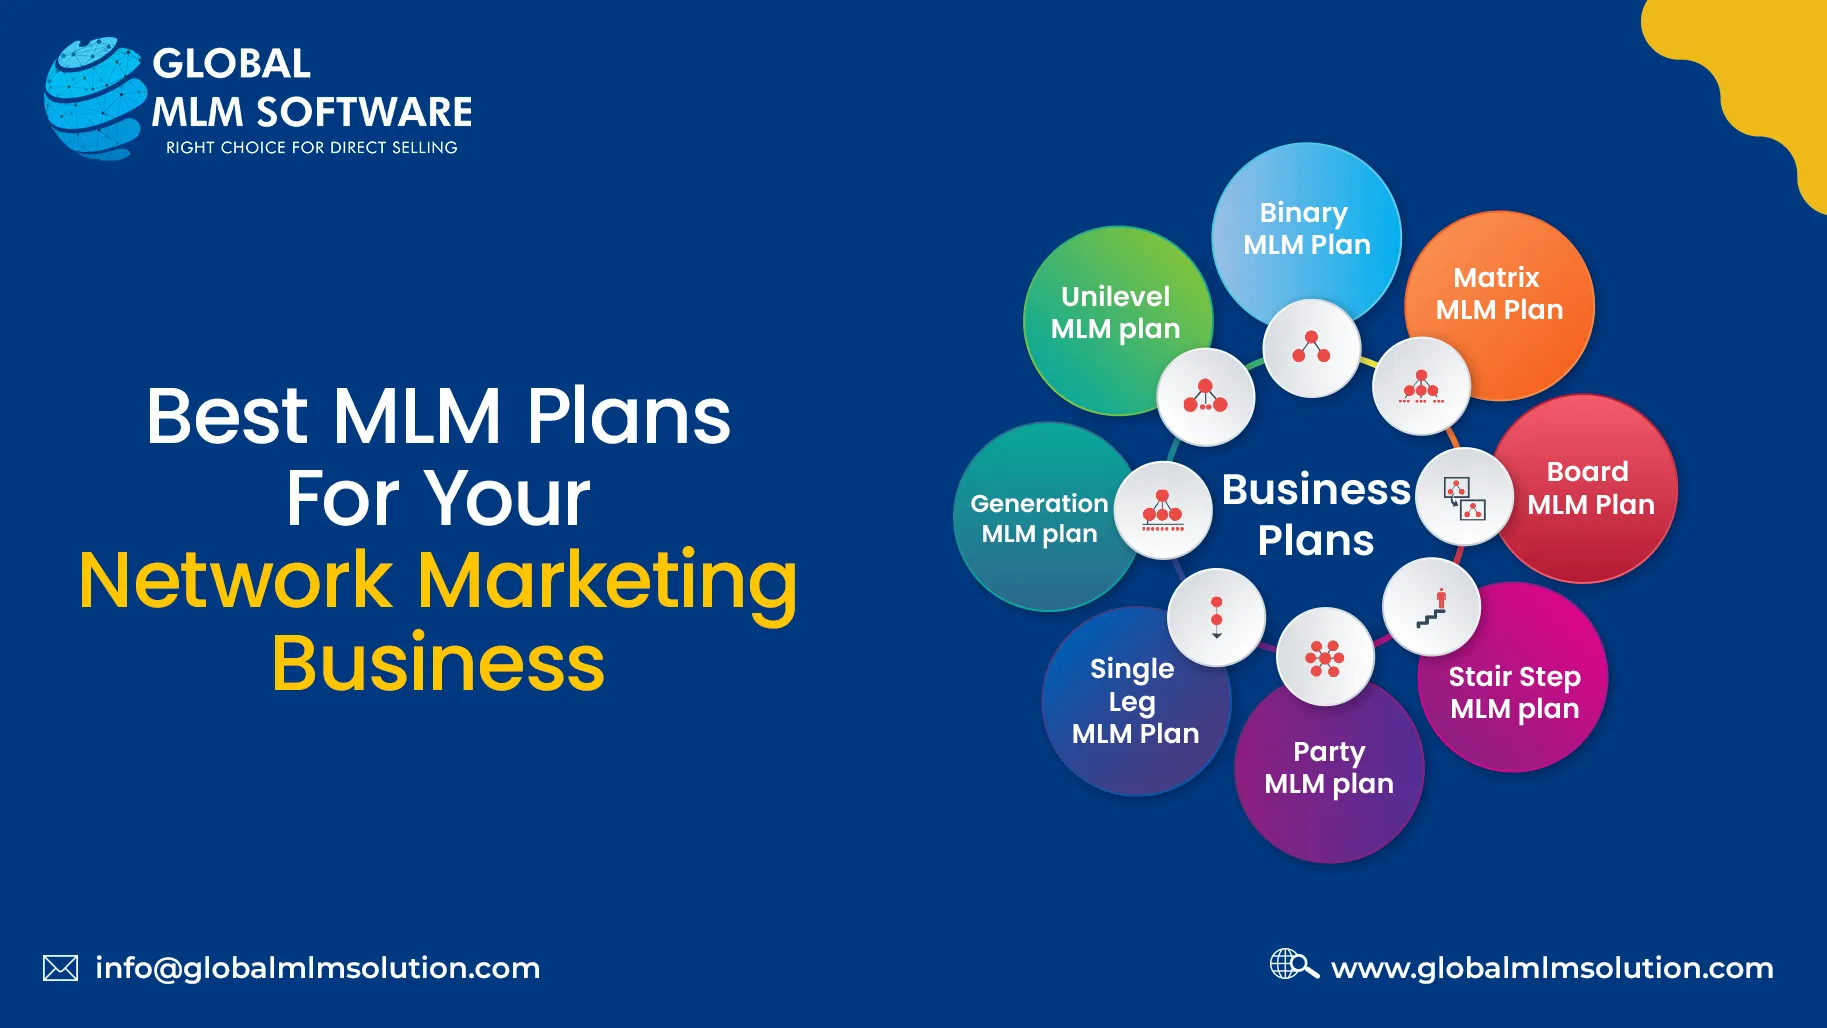 Which MLM Plan is better for Your Networking Marketing Business?